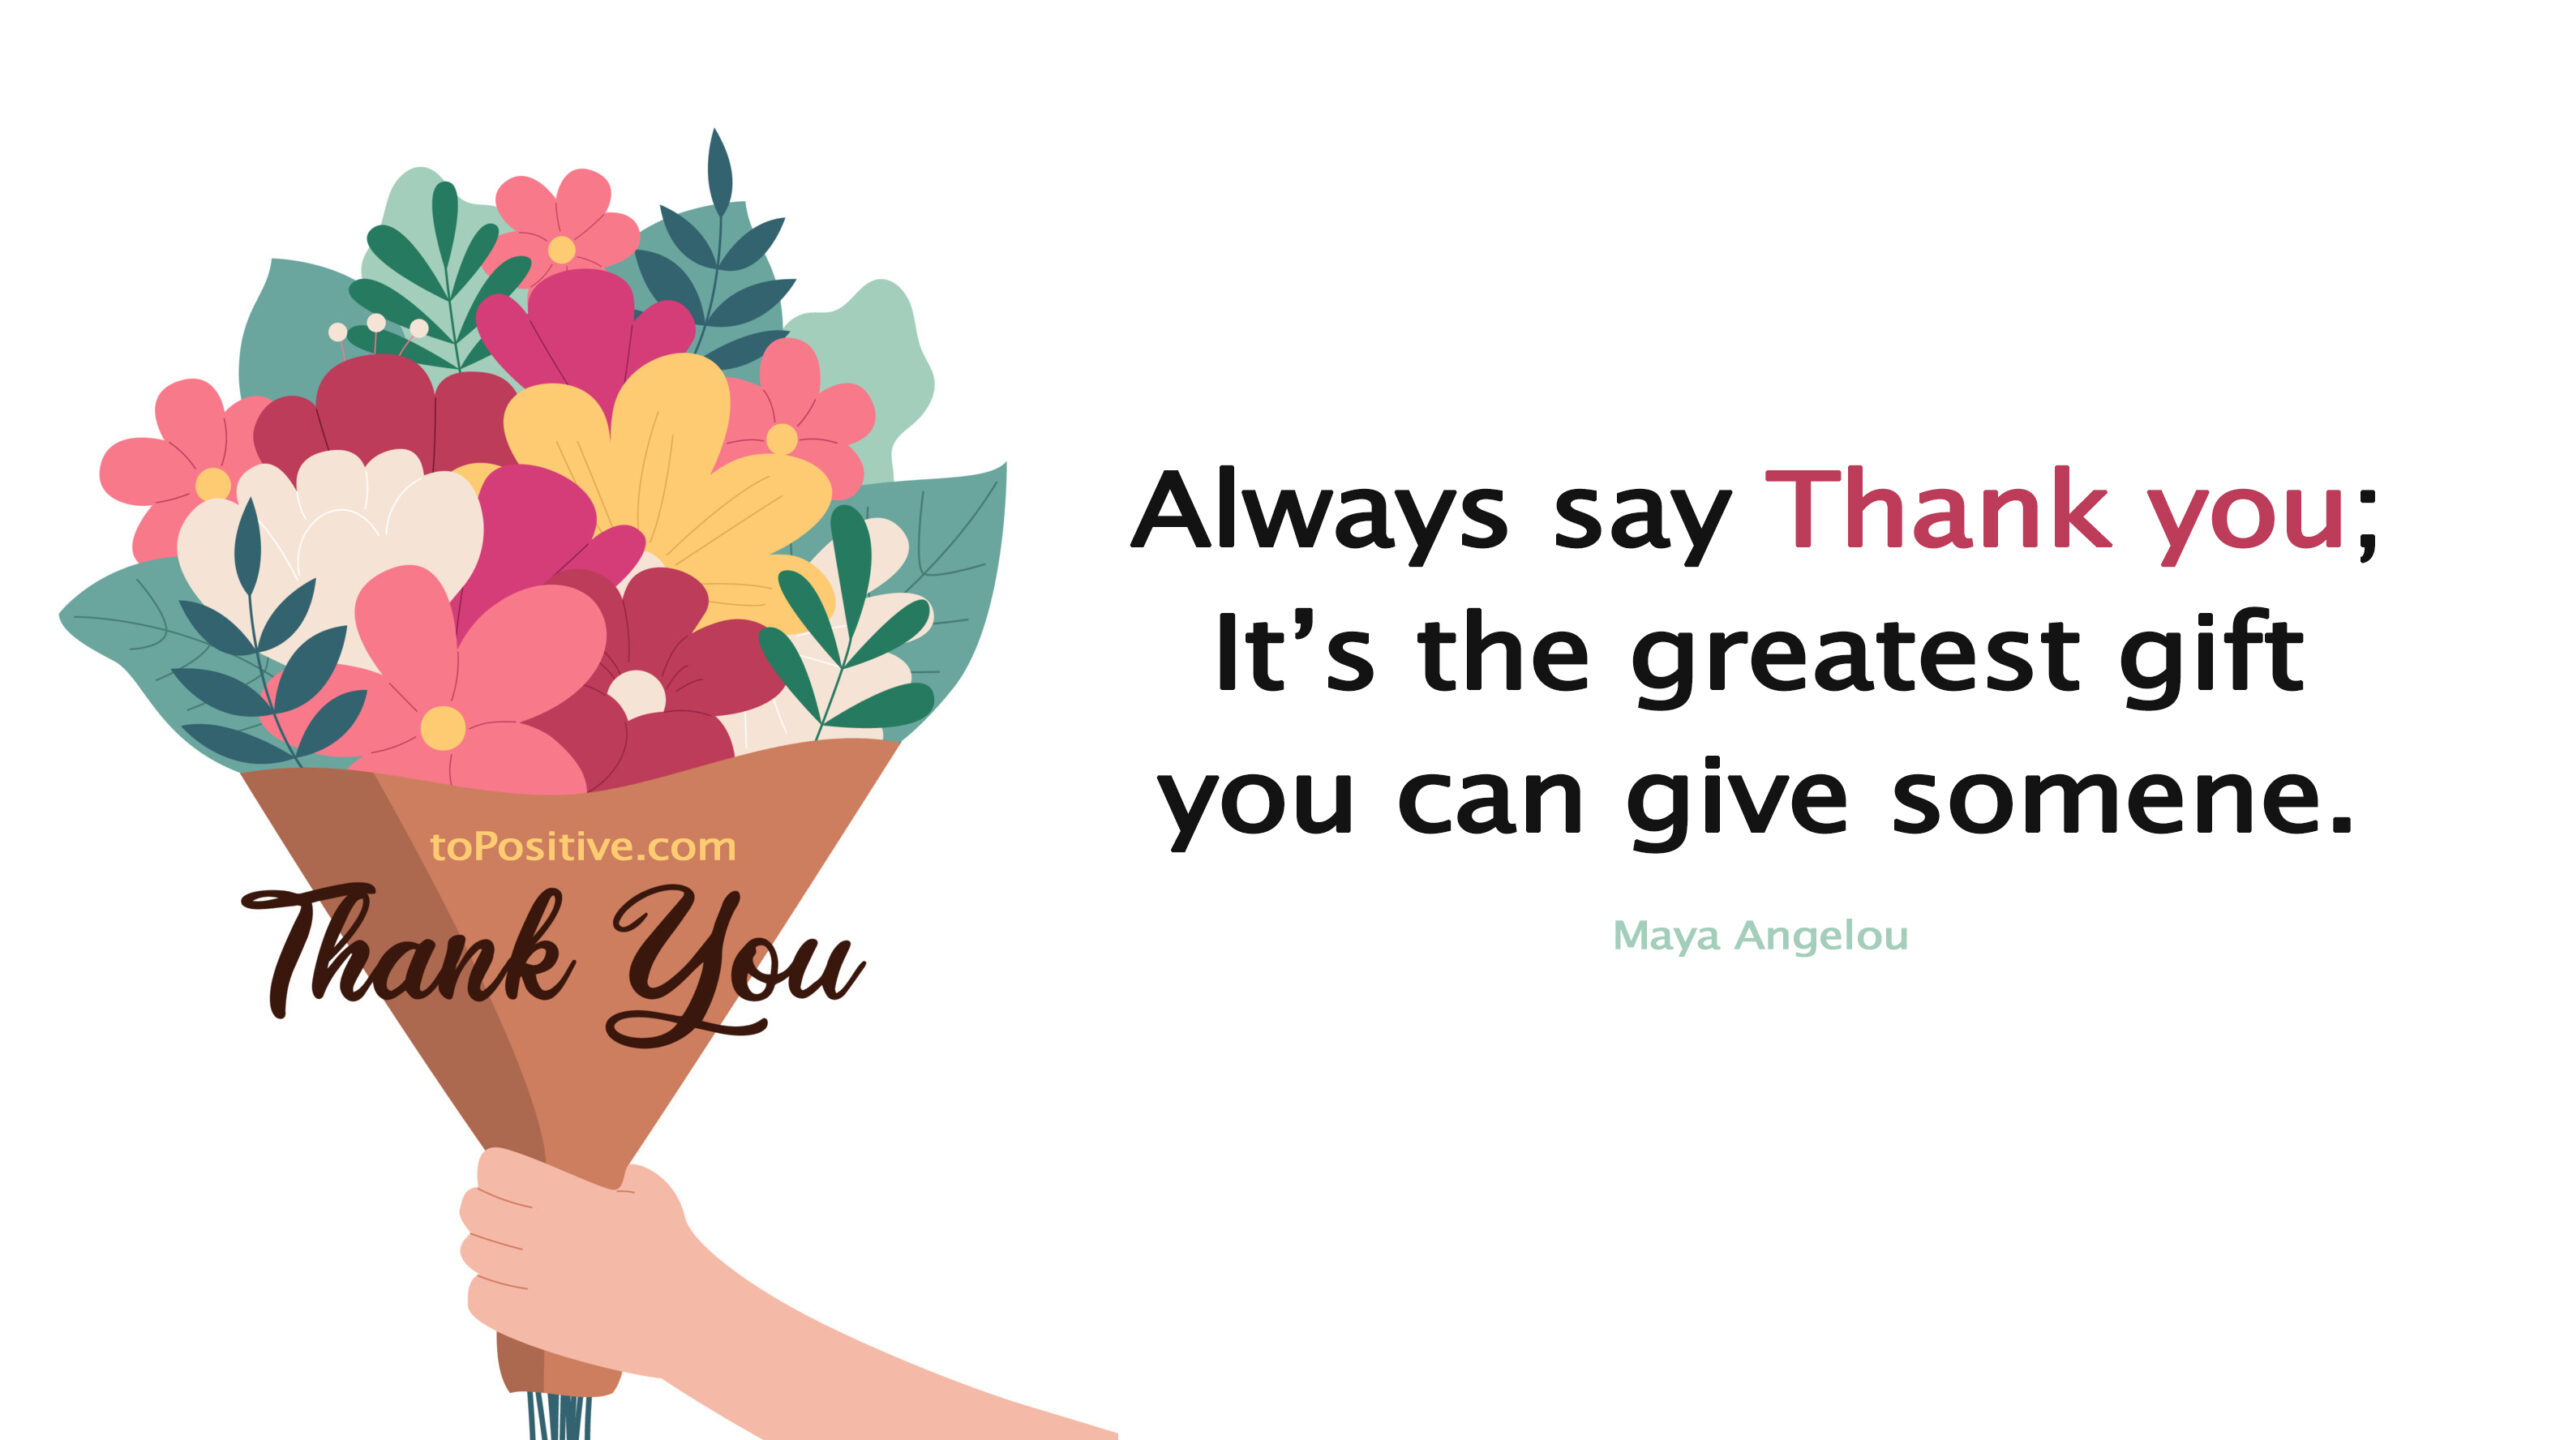 it is important to know how to say "thank you" in a manner that conveys sincerity and appreciation